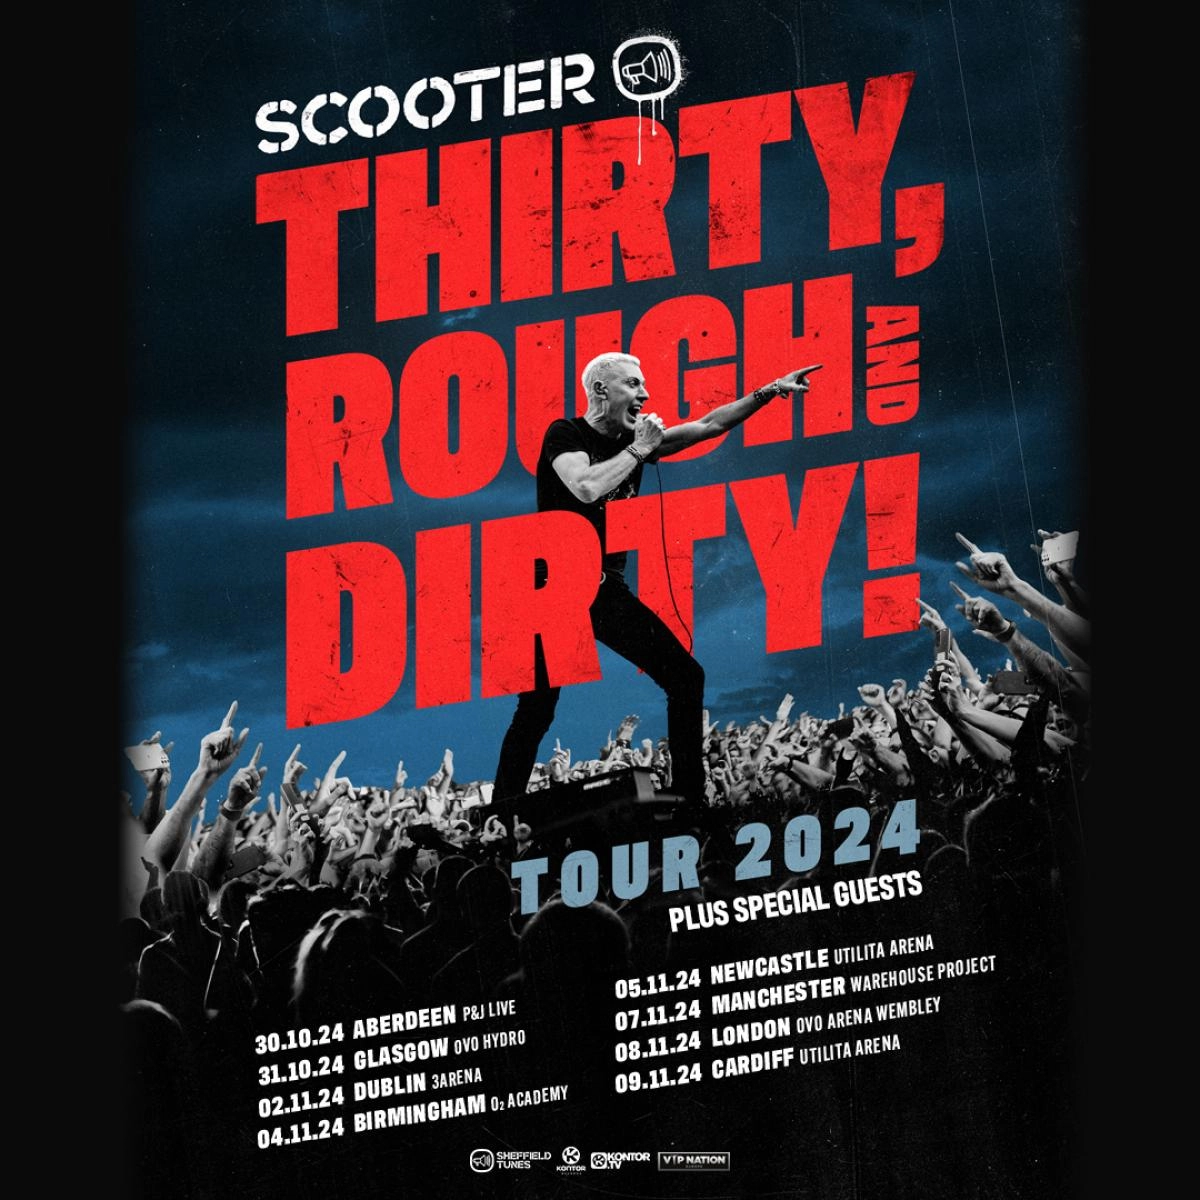 Scooter al OVO Arena Wembley Tickets